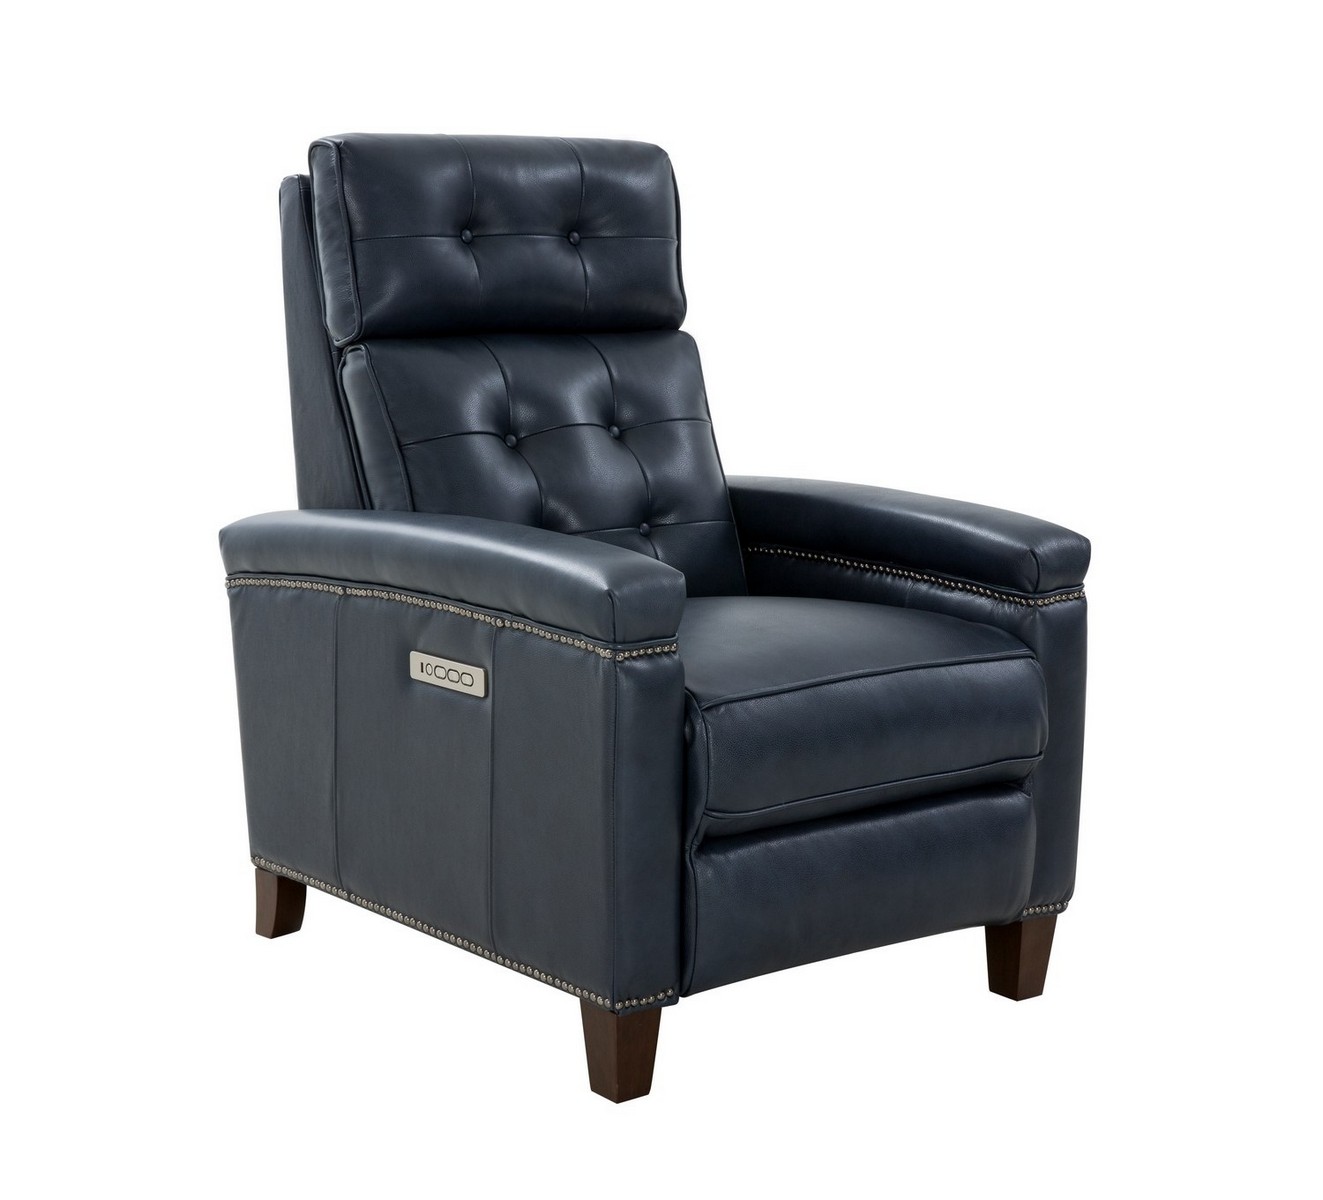 Barcalounger Jamey Zero Gravity Power Recliner Chair with Power Head Rest and Lumbar - Barone Navy Blue/All Leather